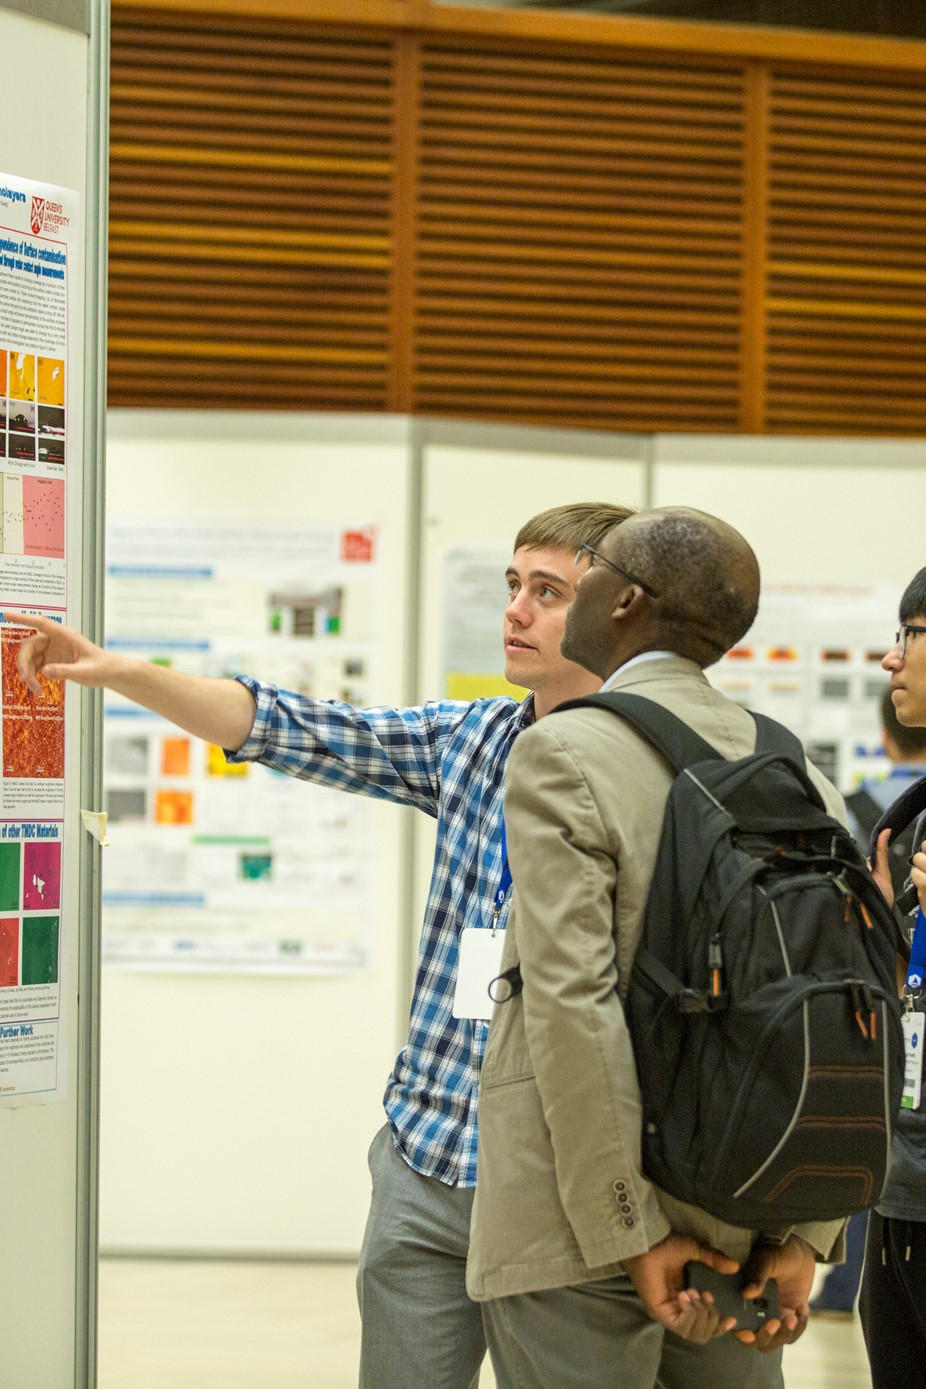  Poster session at the Graphene Week 2018